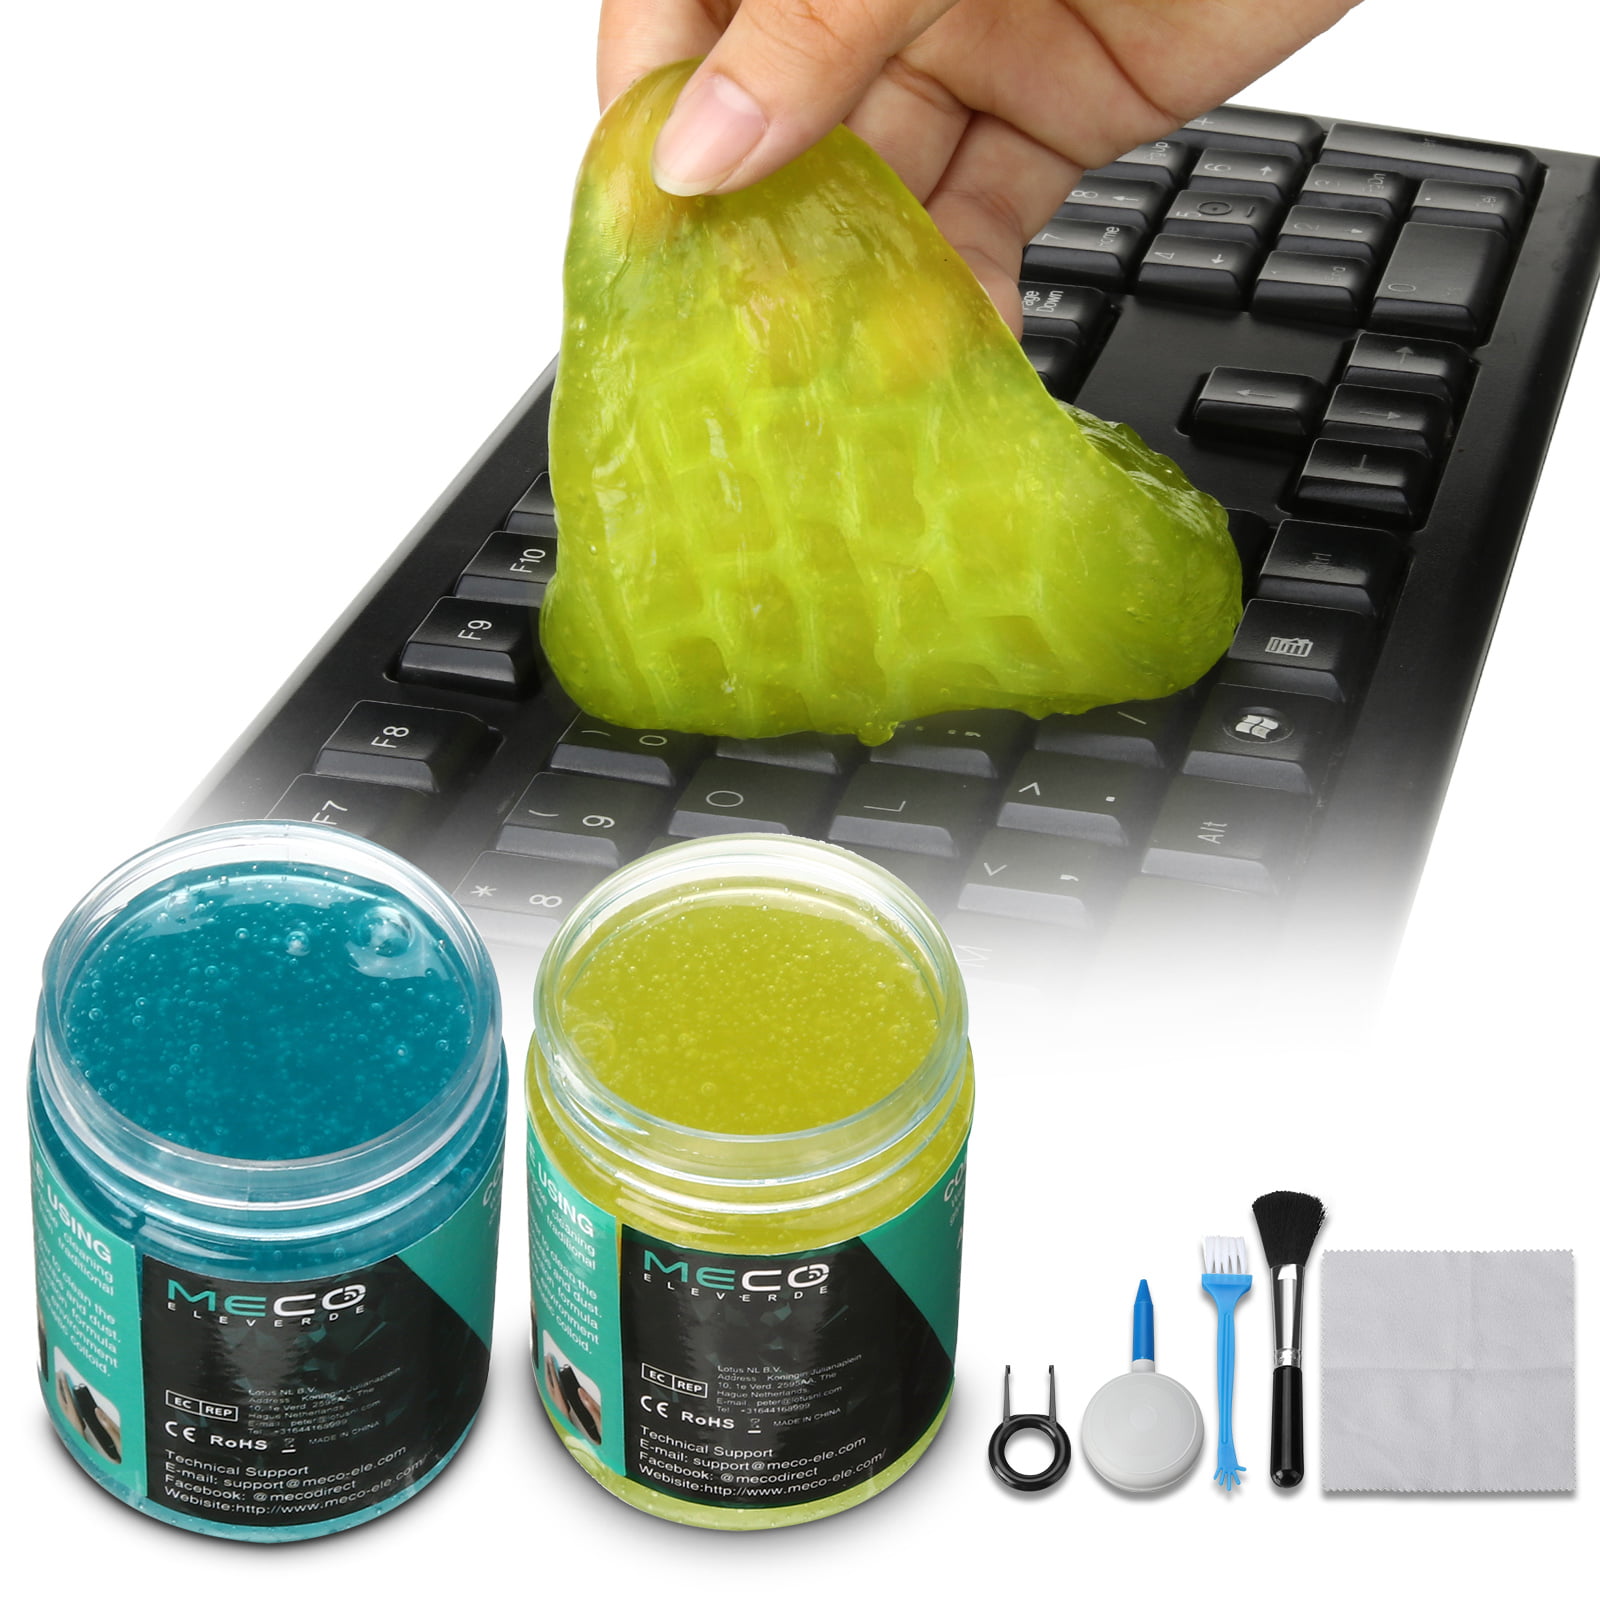 Qii lu Keyboard Gel Cleaner Dust Germ Clean Cyber ​​Putty Desk Computer Laptop Phone Car Super Soft Sticky Auto Clean Colla Gum Gel Air Conditioner Outlet Vent Cleaner 